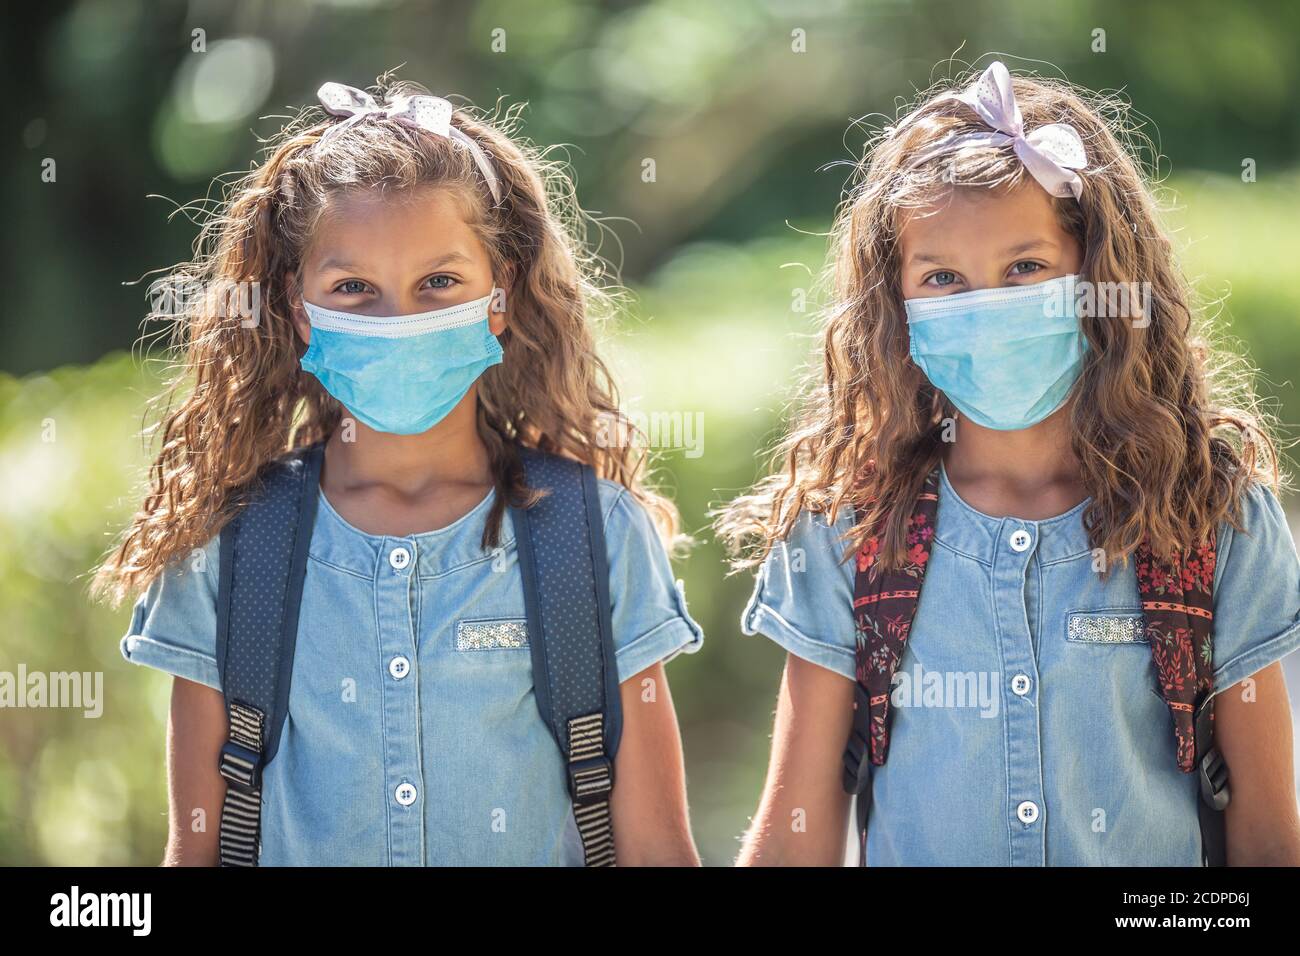 The twin sisters with face masks go back to school during the Covid-19 quarantine. Stock Photo